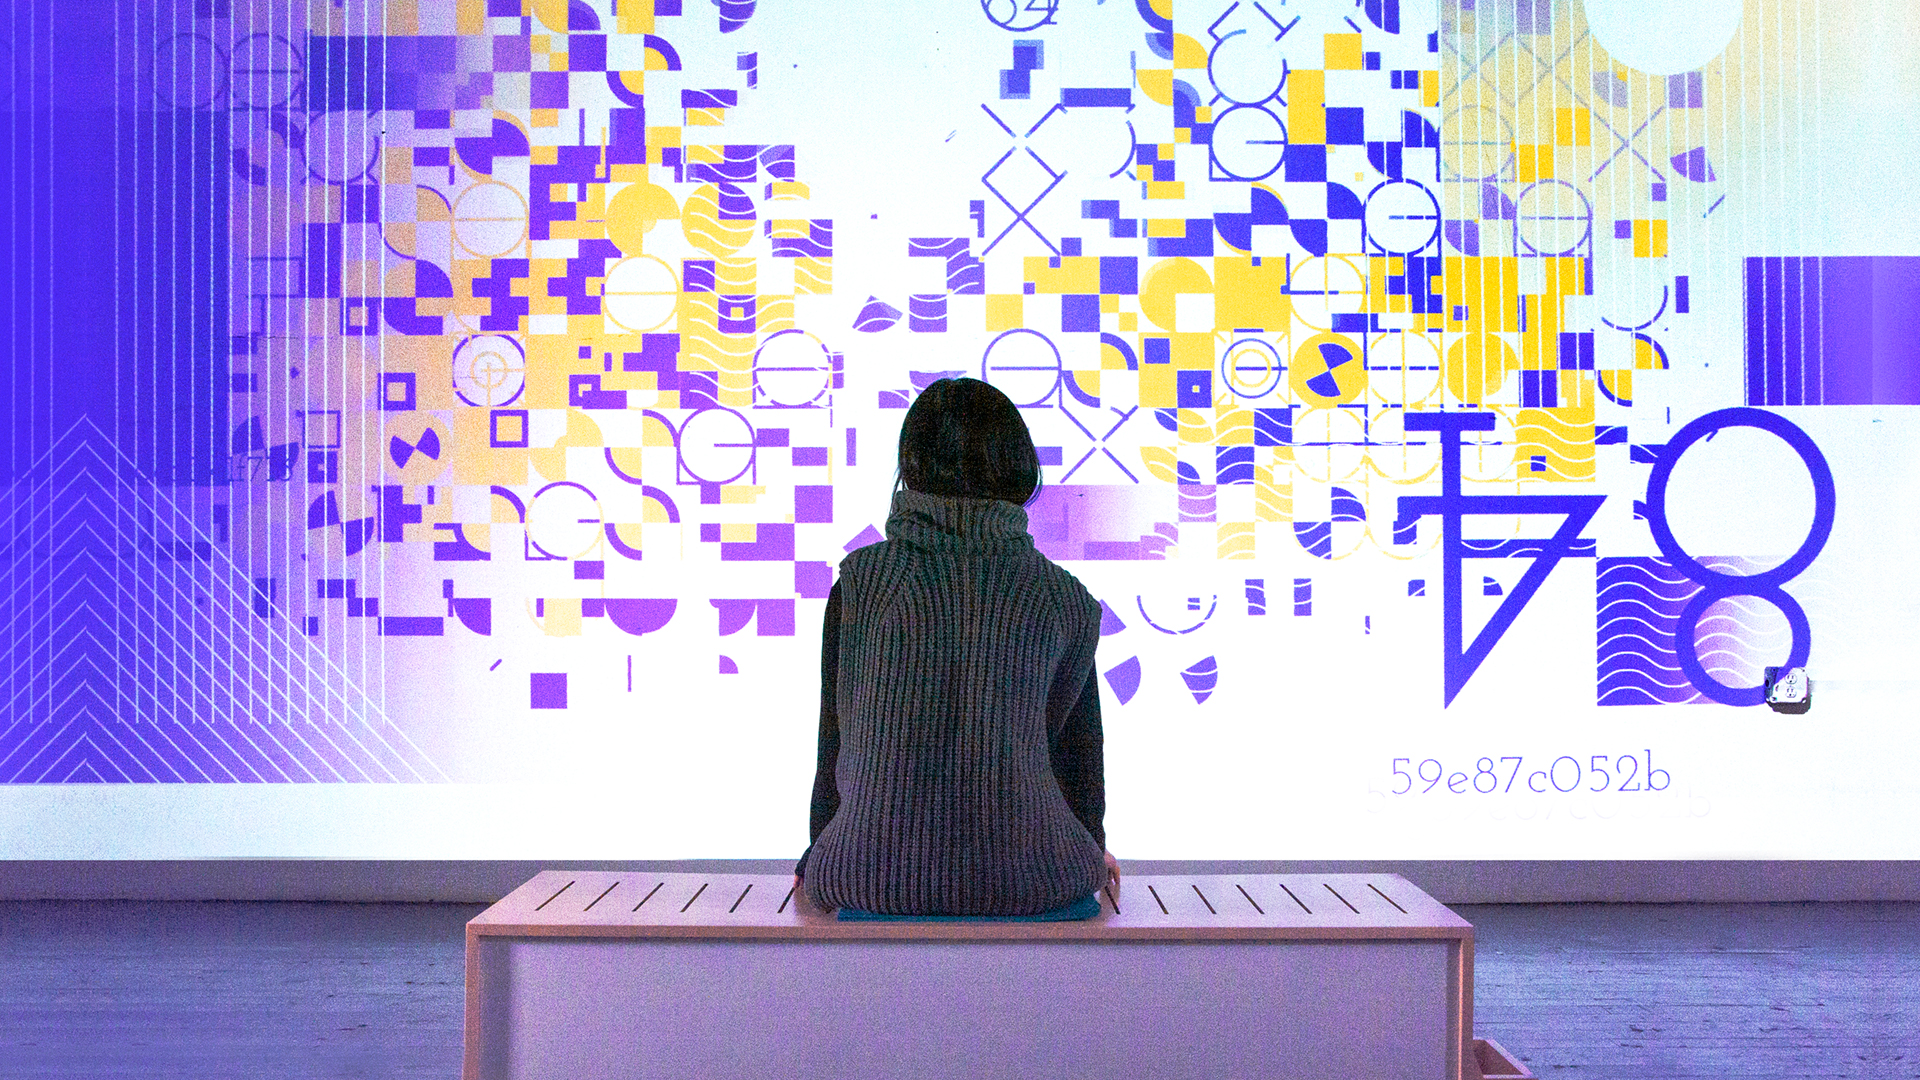 a girl sits on butchain bench and watches her unqiue blockchain art generate on the screen in front of her